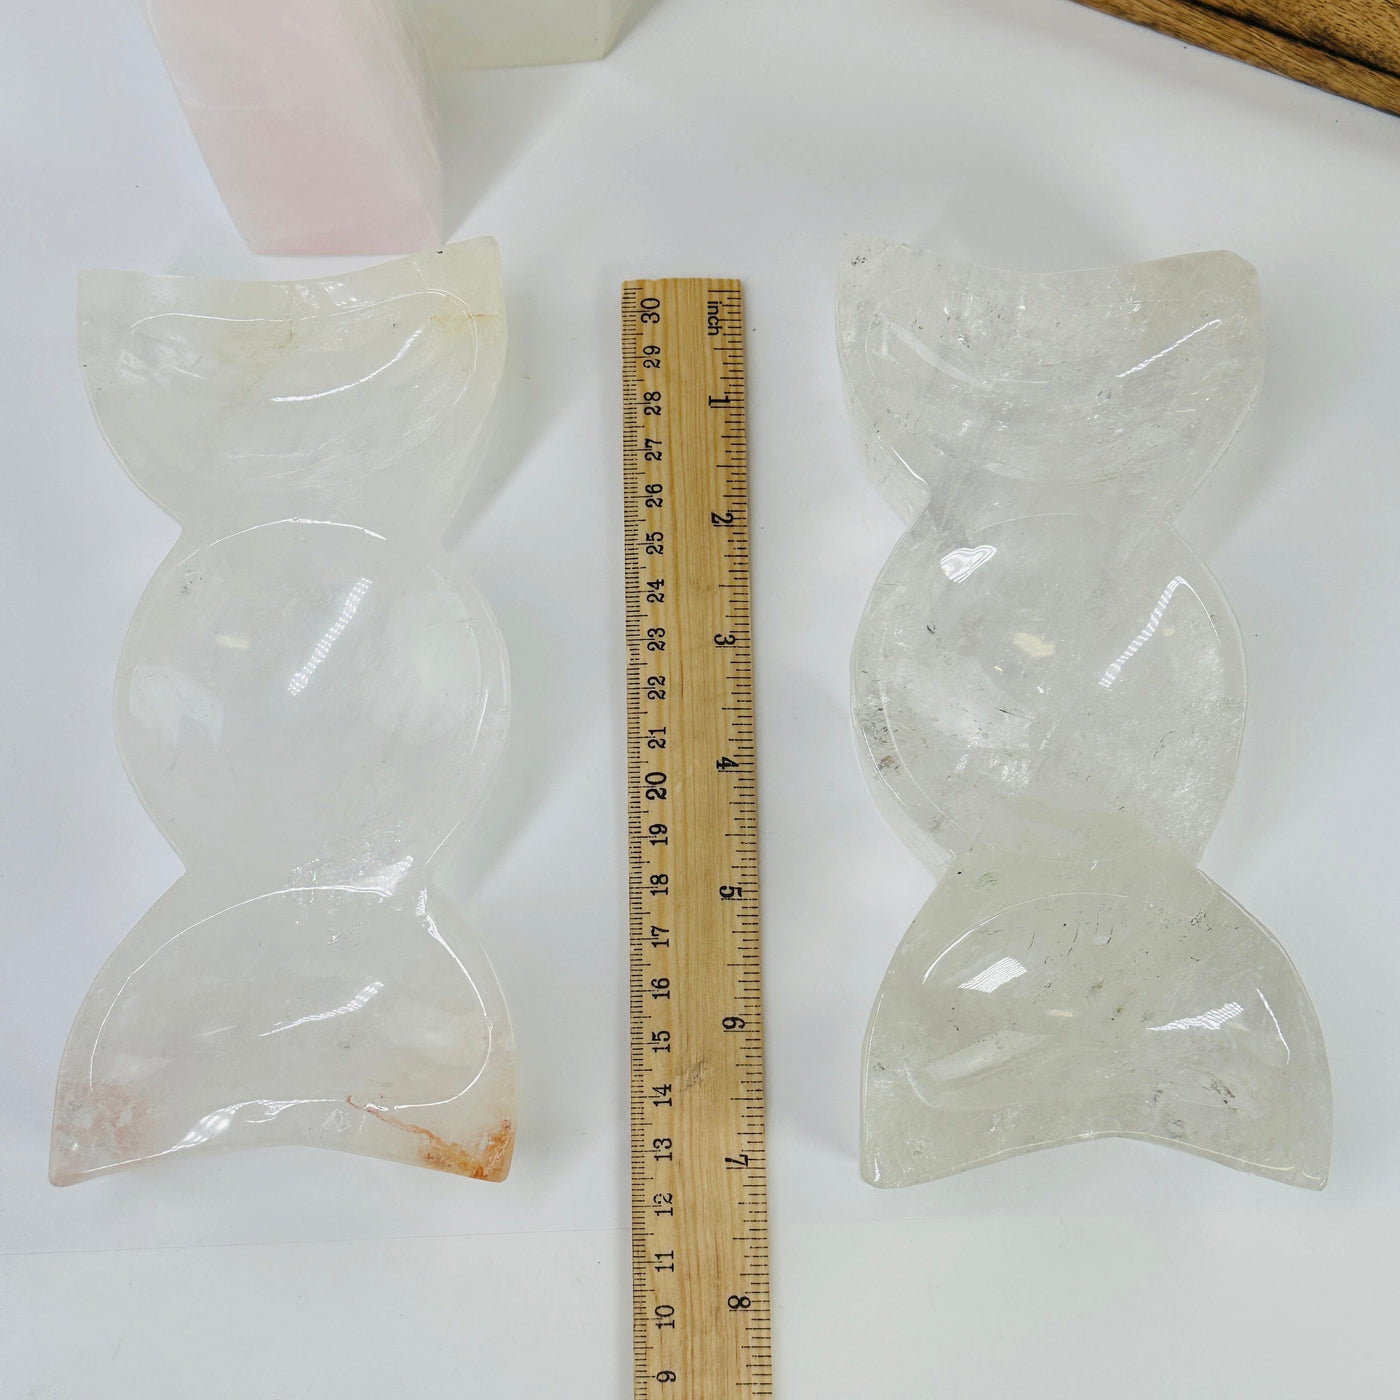 crystal quartz triple moon phase bowl next to a ruler for size reference